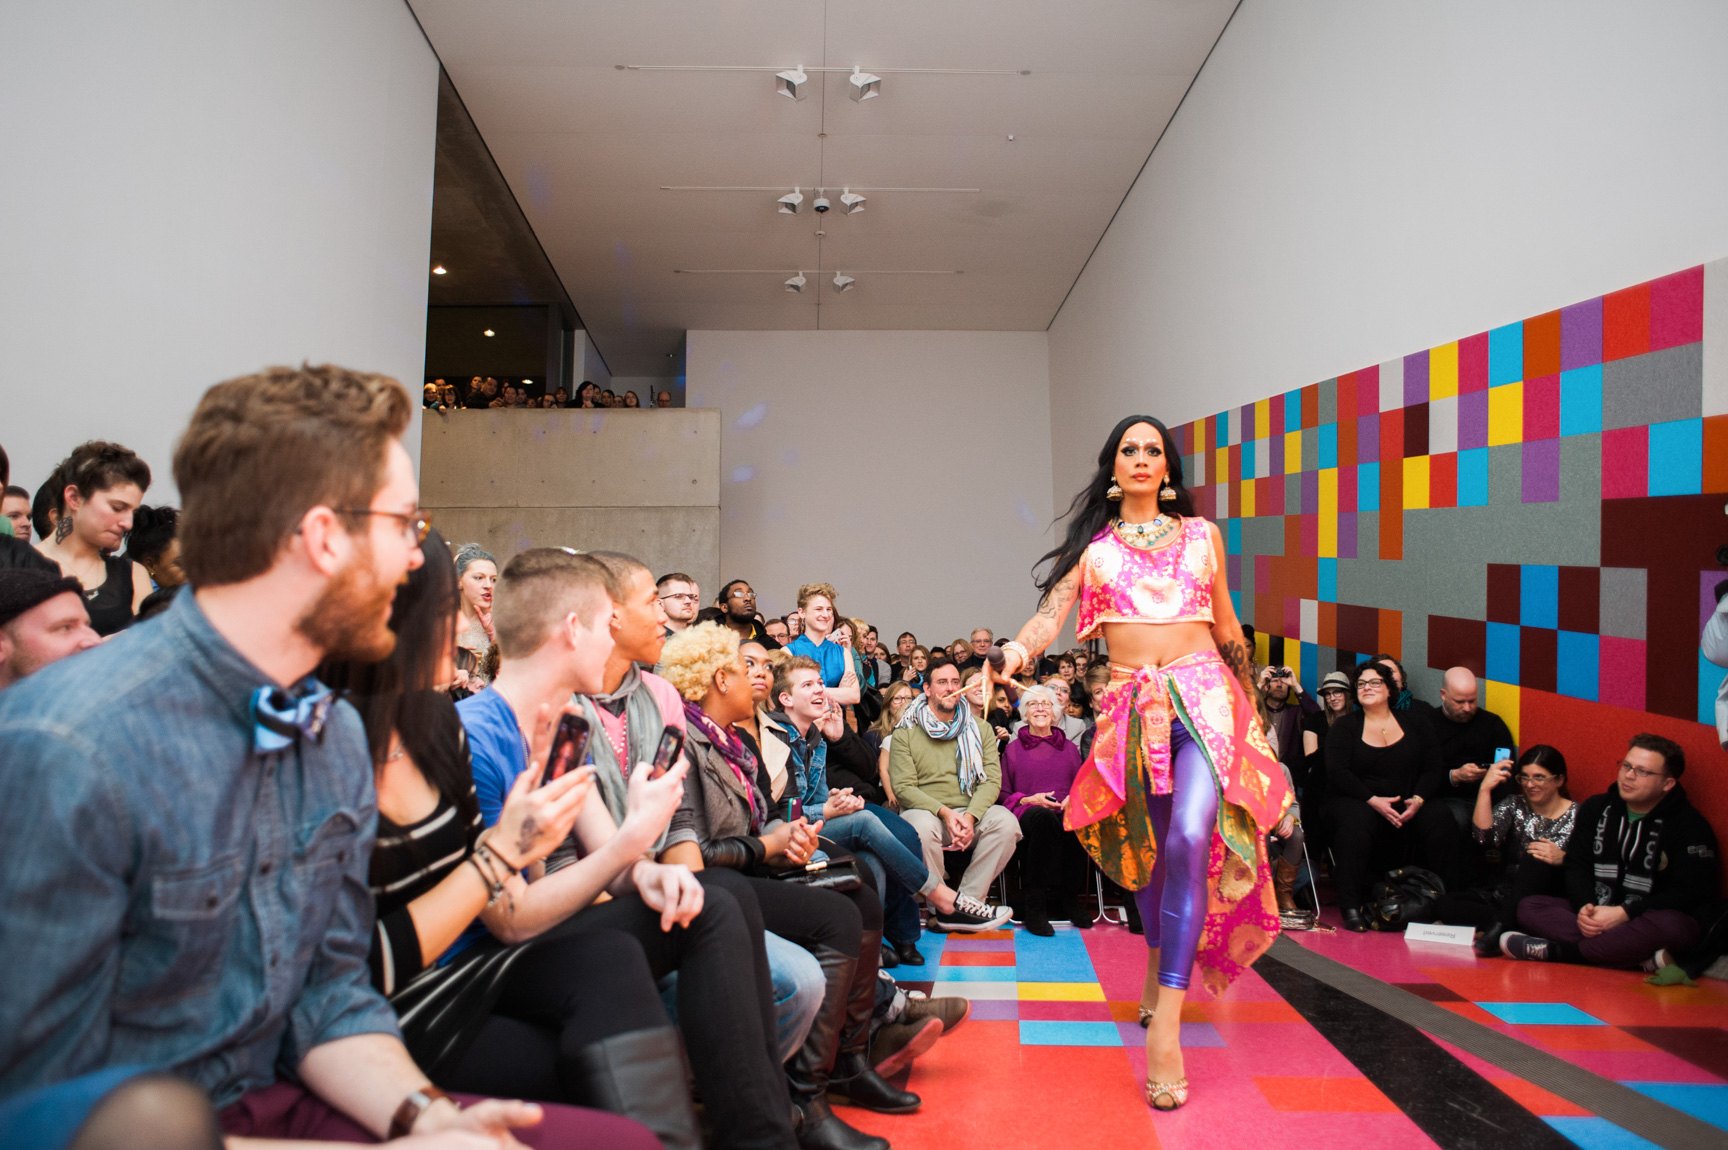 A drag performer struts in the Main Gallery for a packed audience in front of David Scanavino's installation "Candy Crush."